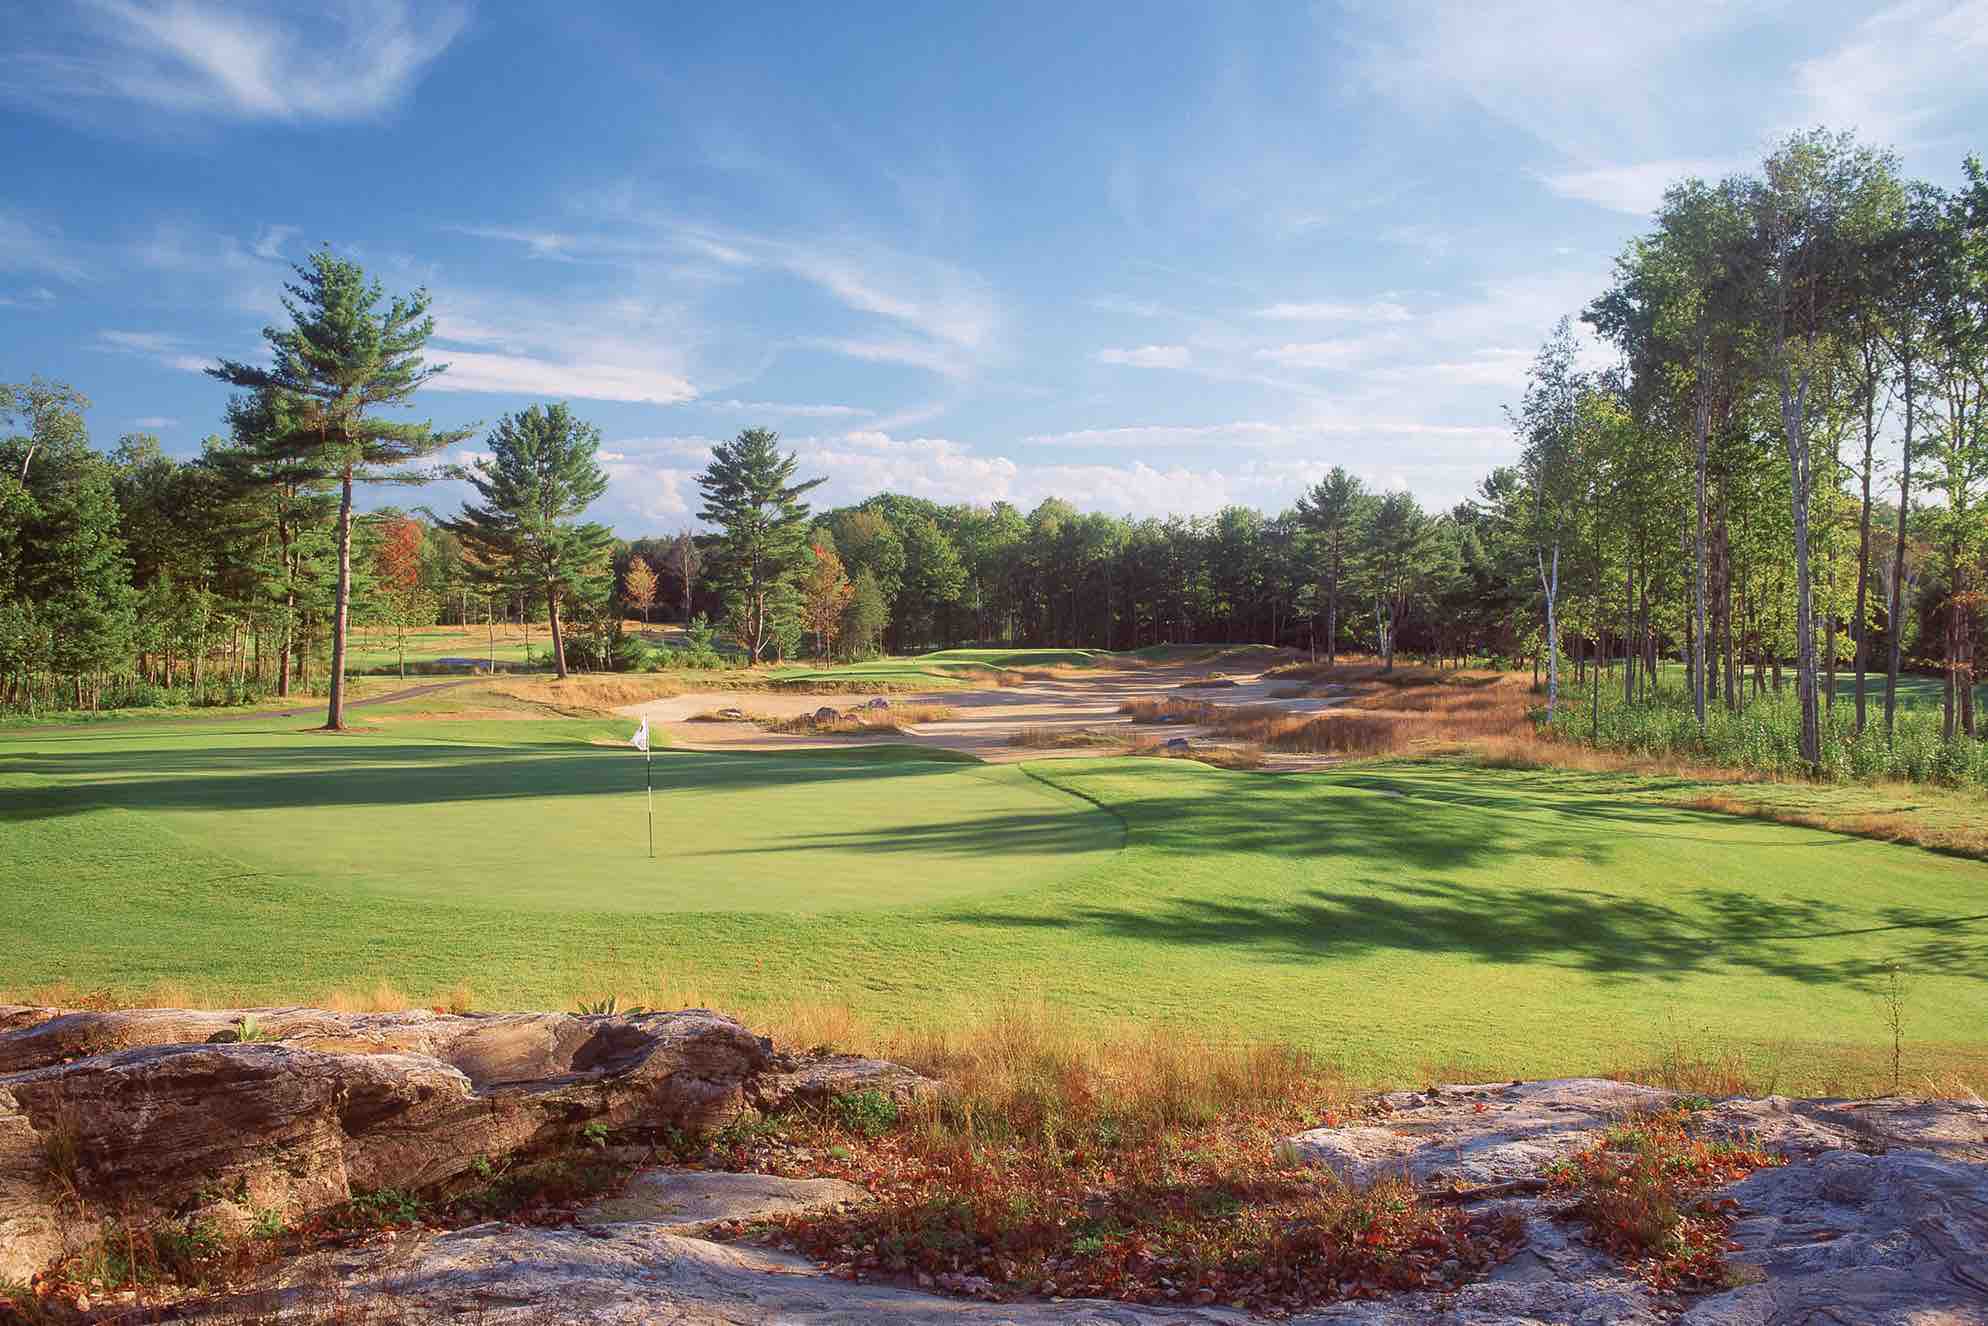 SHown here Taboo is one of the top Muskoka golf courses to play